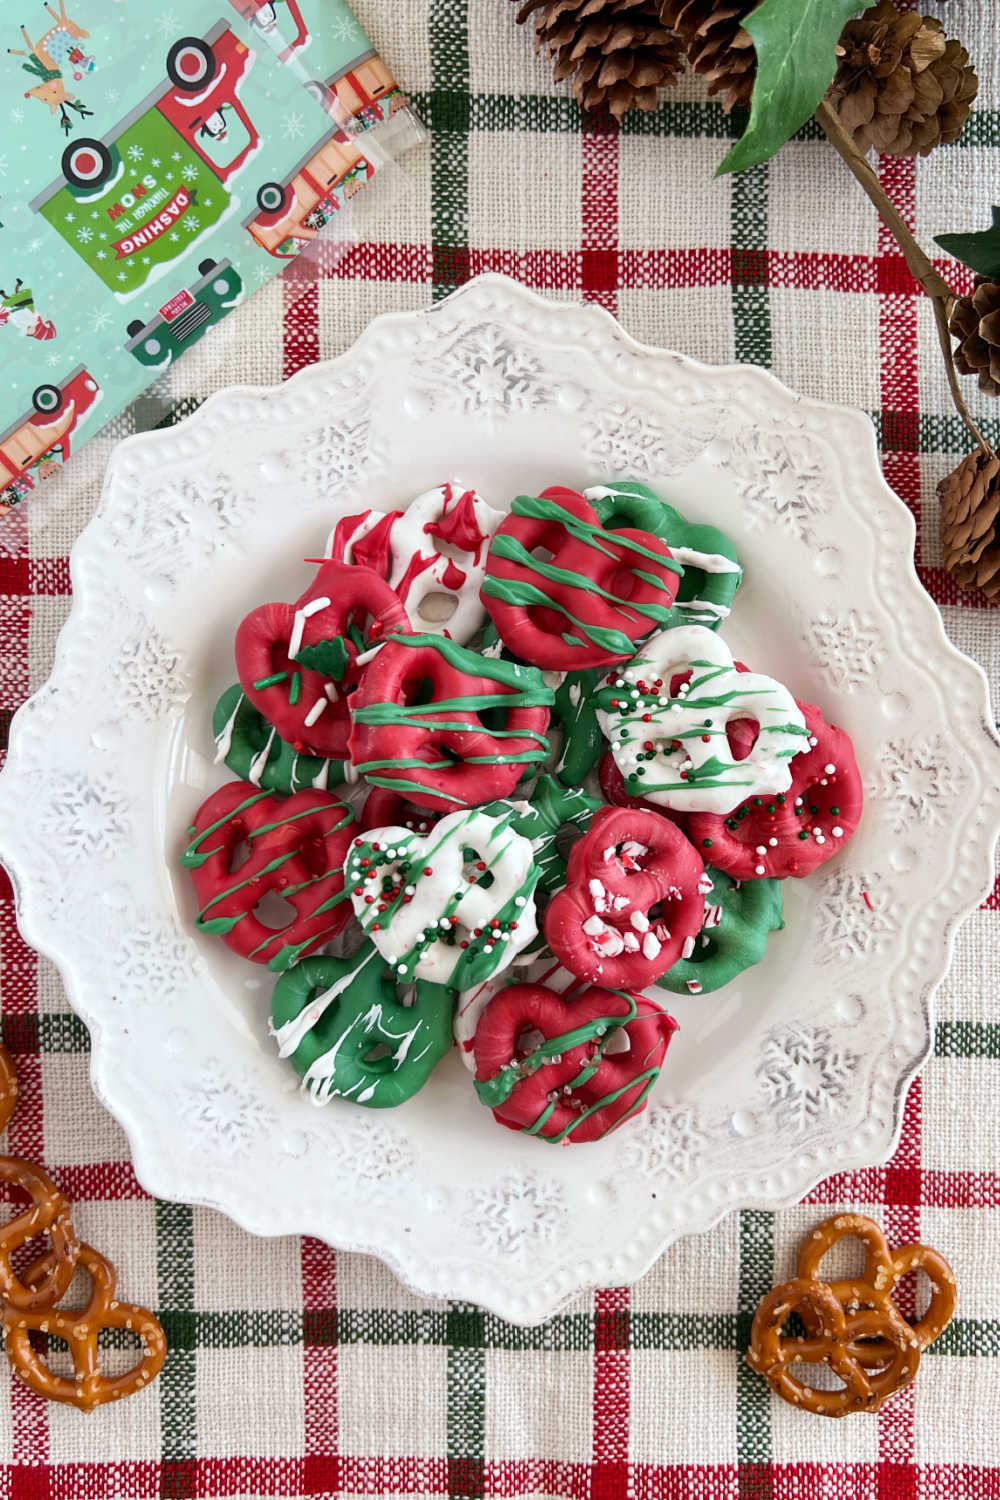 chocolate covered pretzels for Christmas with candy sprinkles on plate